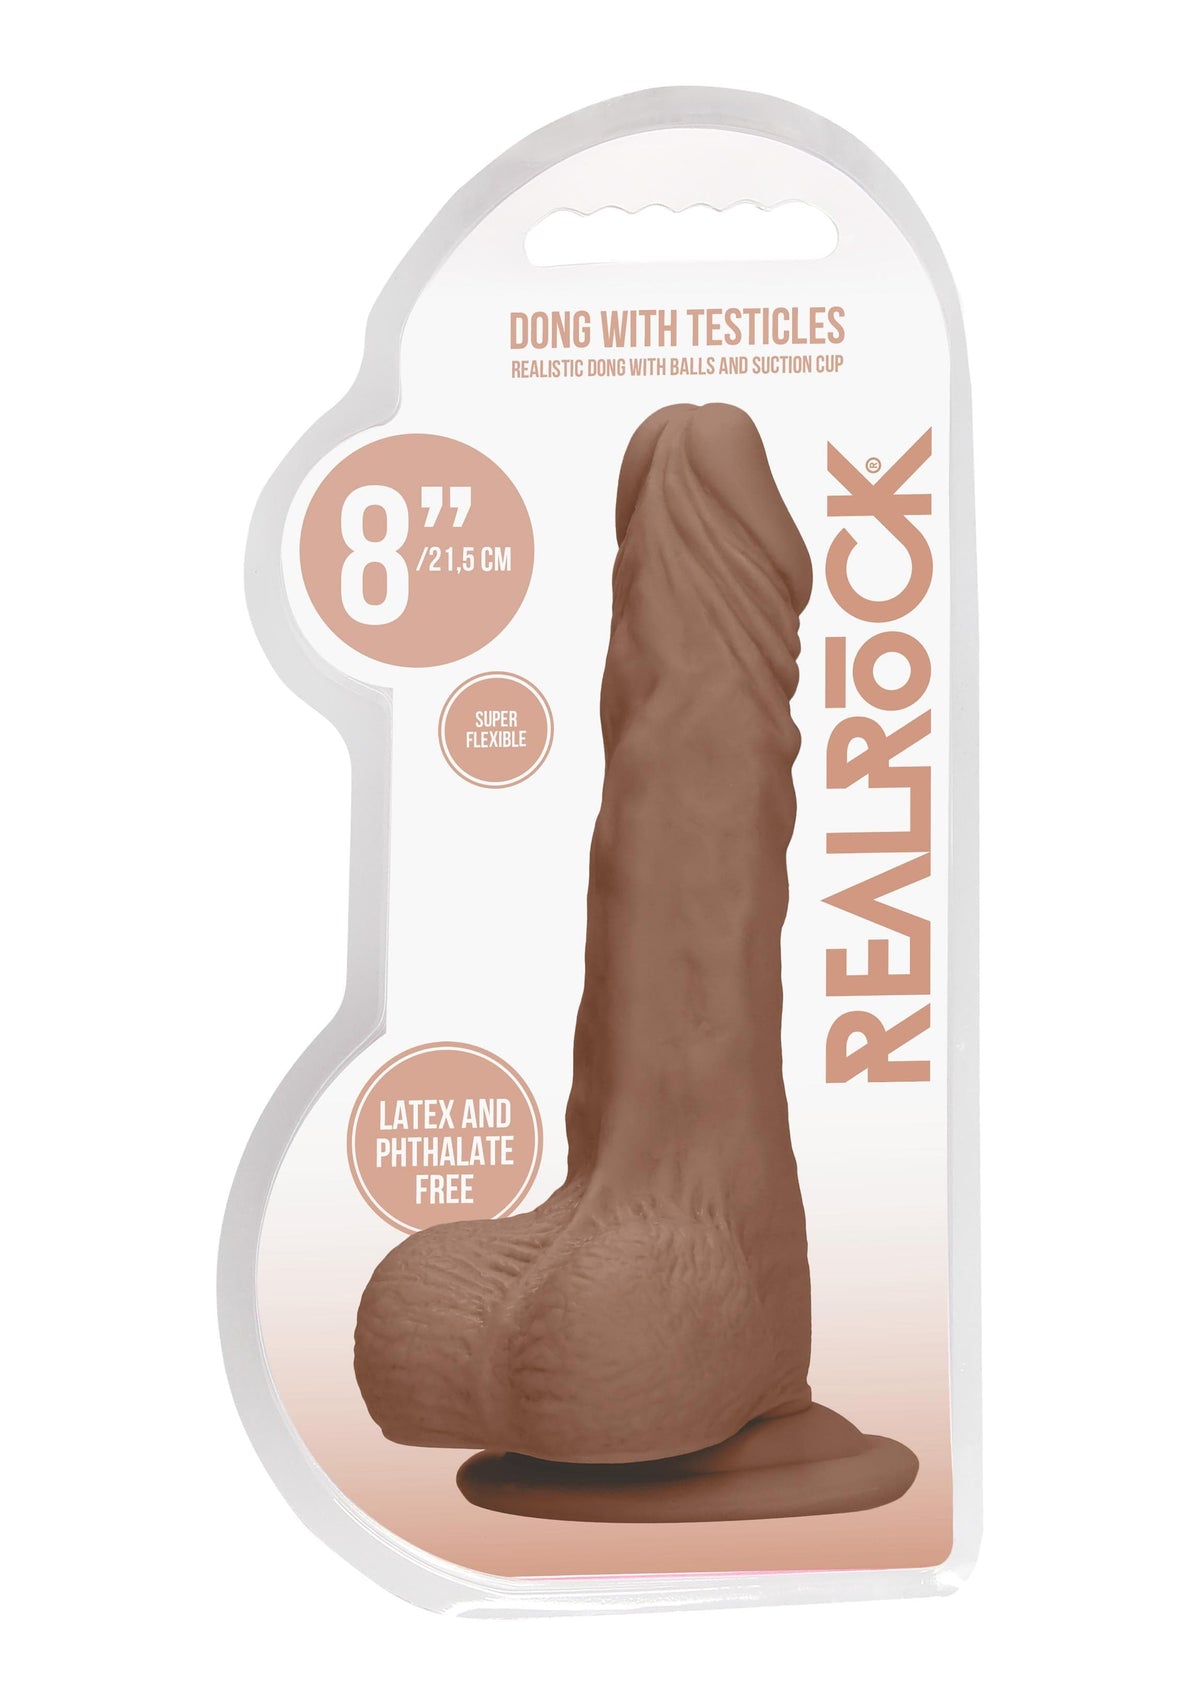 8 inch dong with testicles tan